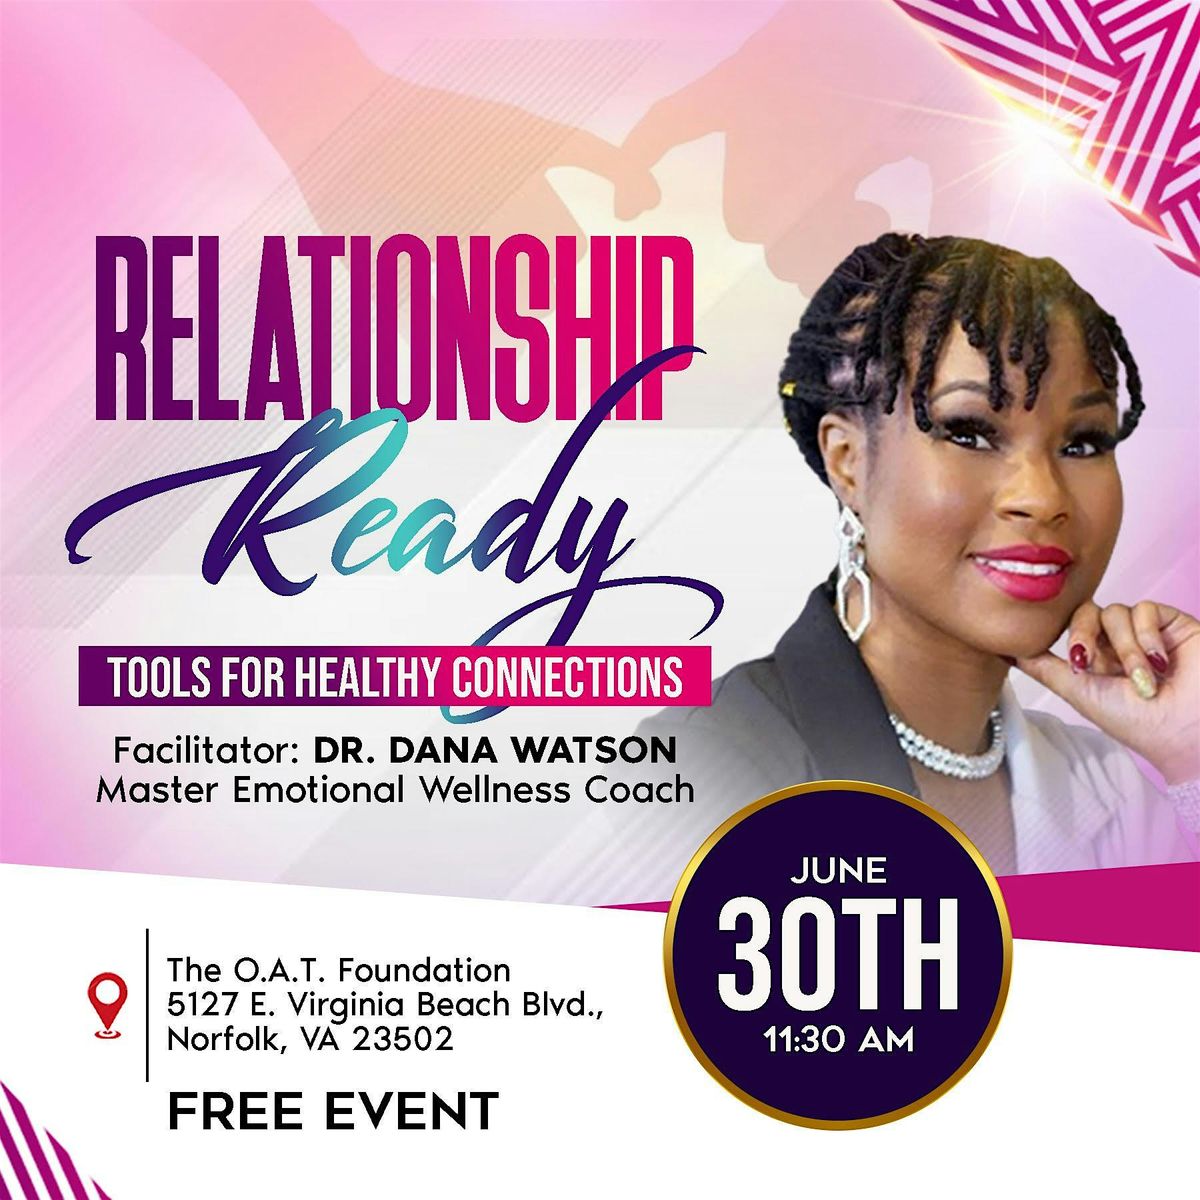 Relationship Ready Tools For Healthy Connections